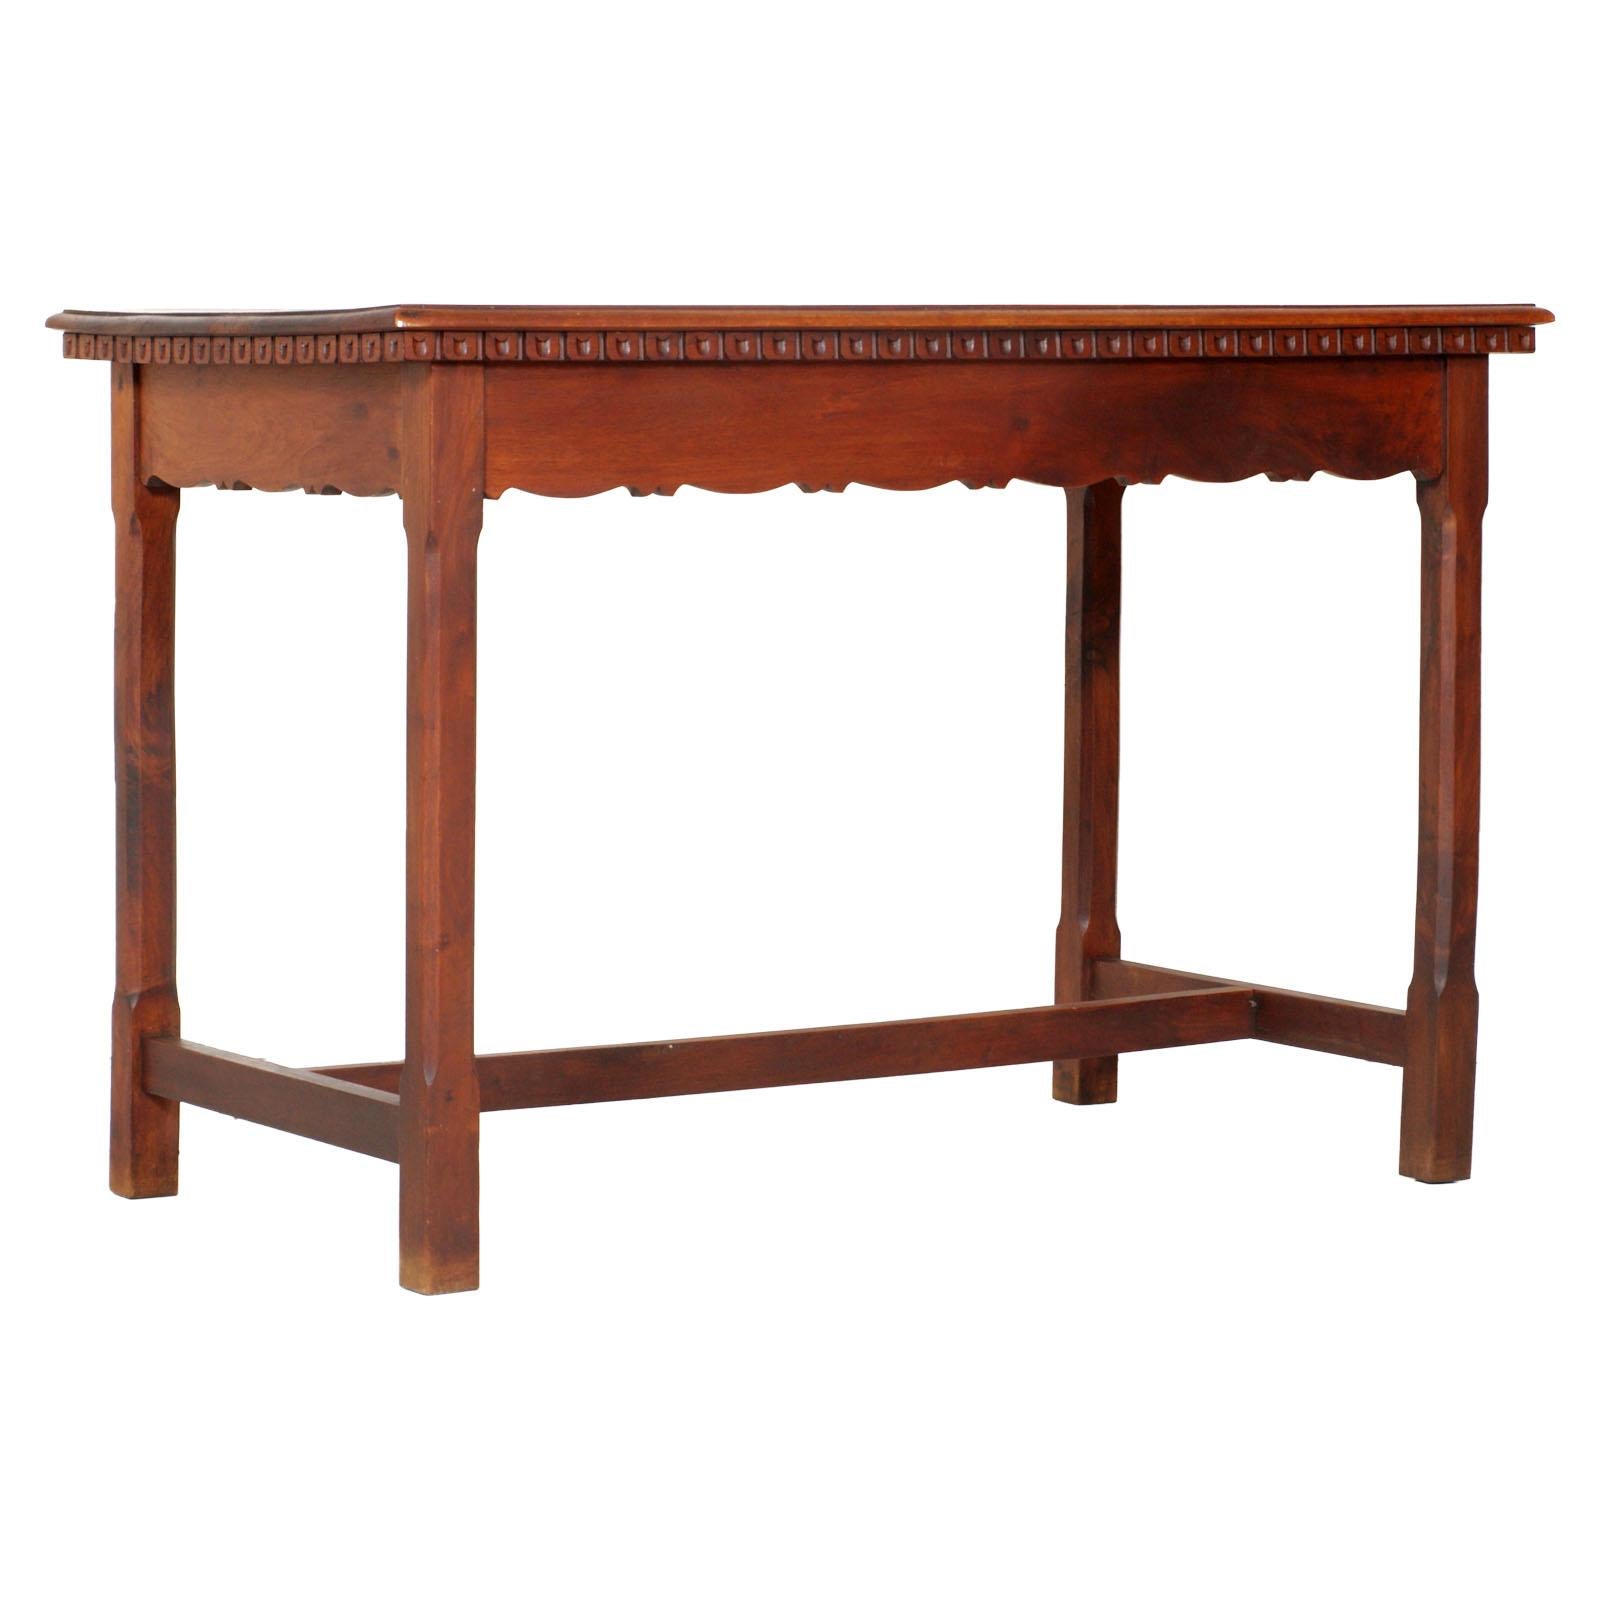 Early 20th century Wiener occasional table, writing desk Art Nouveau, all solid walnut restored and wax polished.  This wiener werkstatte table, with the dimensions of a desk, recovered in Tyrol has exceptional lines and proportions with the edge of